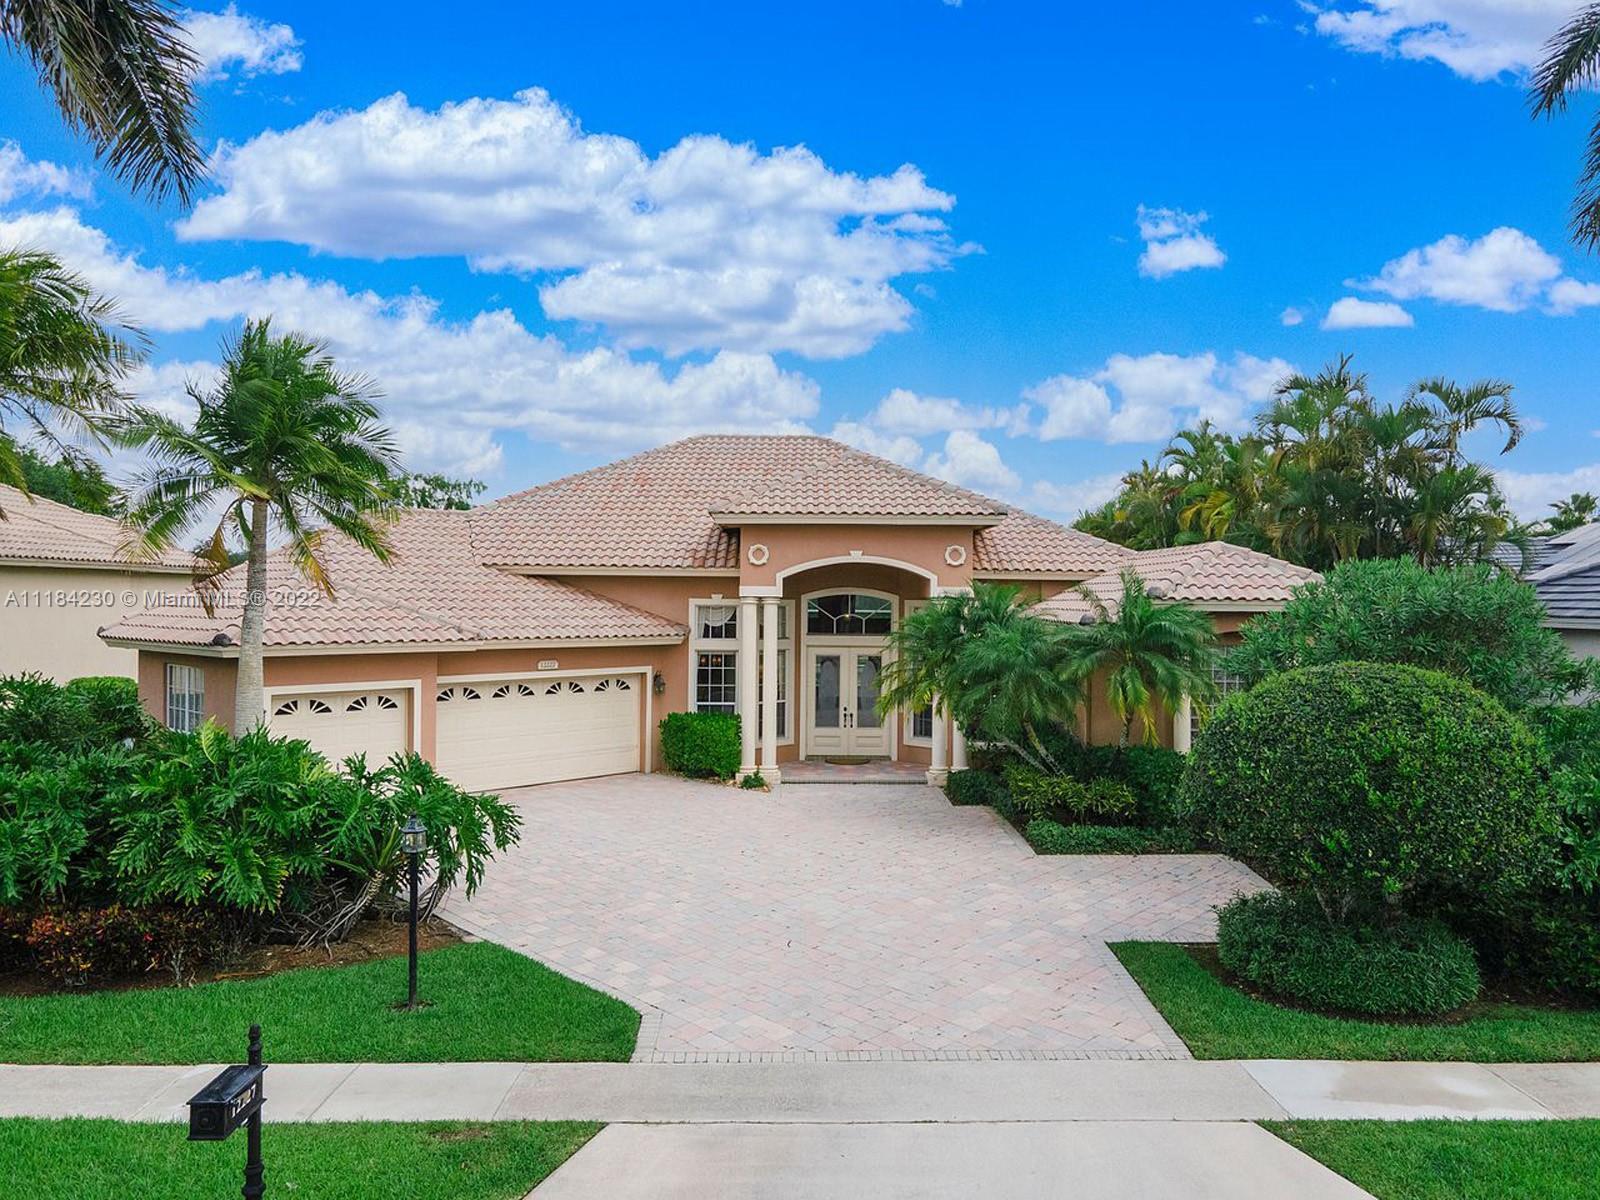 STUNNING 4 BEDROOM PLUS DEN, 3.5 BATH HOME IN BOCA FALLS.  THE HOME IS LOCATED IN THE CRYSTAL POINTE